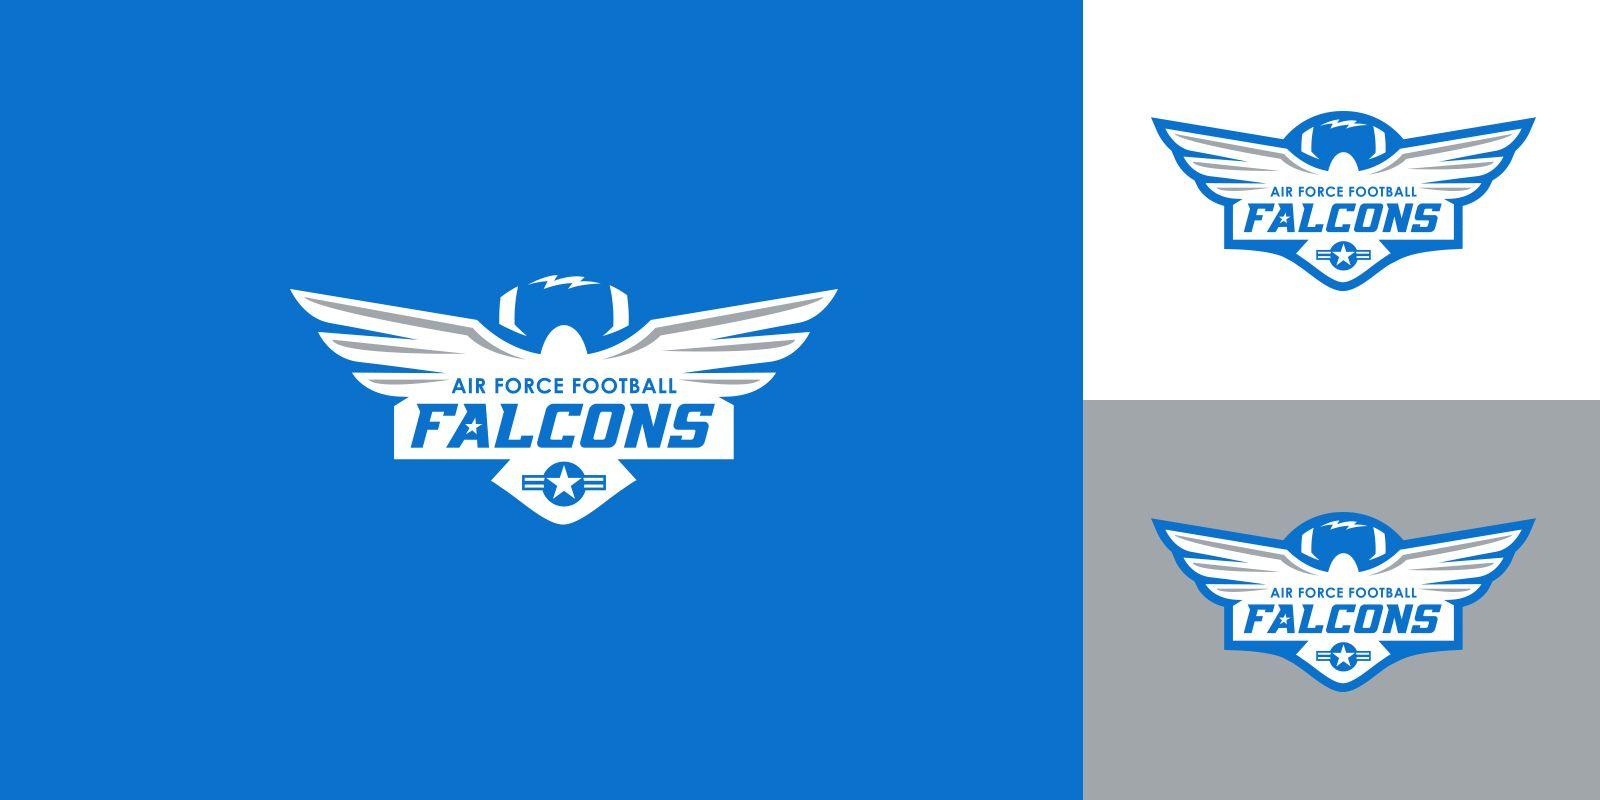 Air Force Falcons Logo - Air Force Football Identity (Concept)